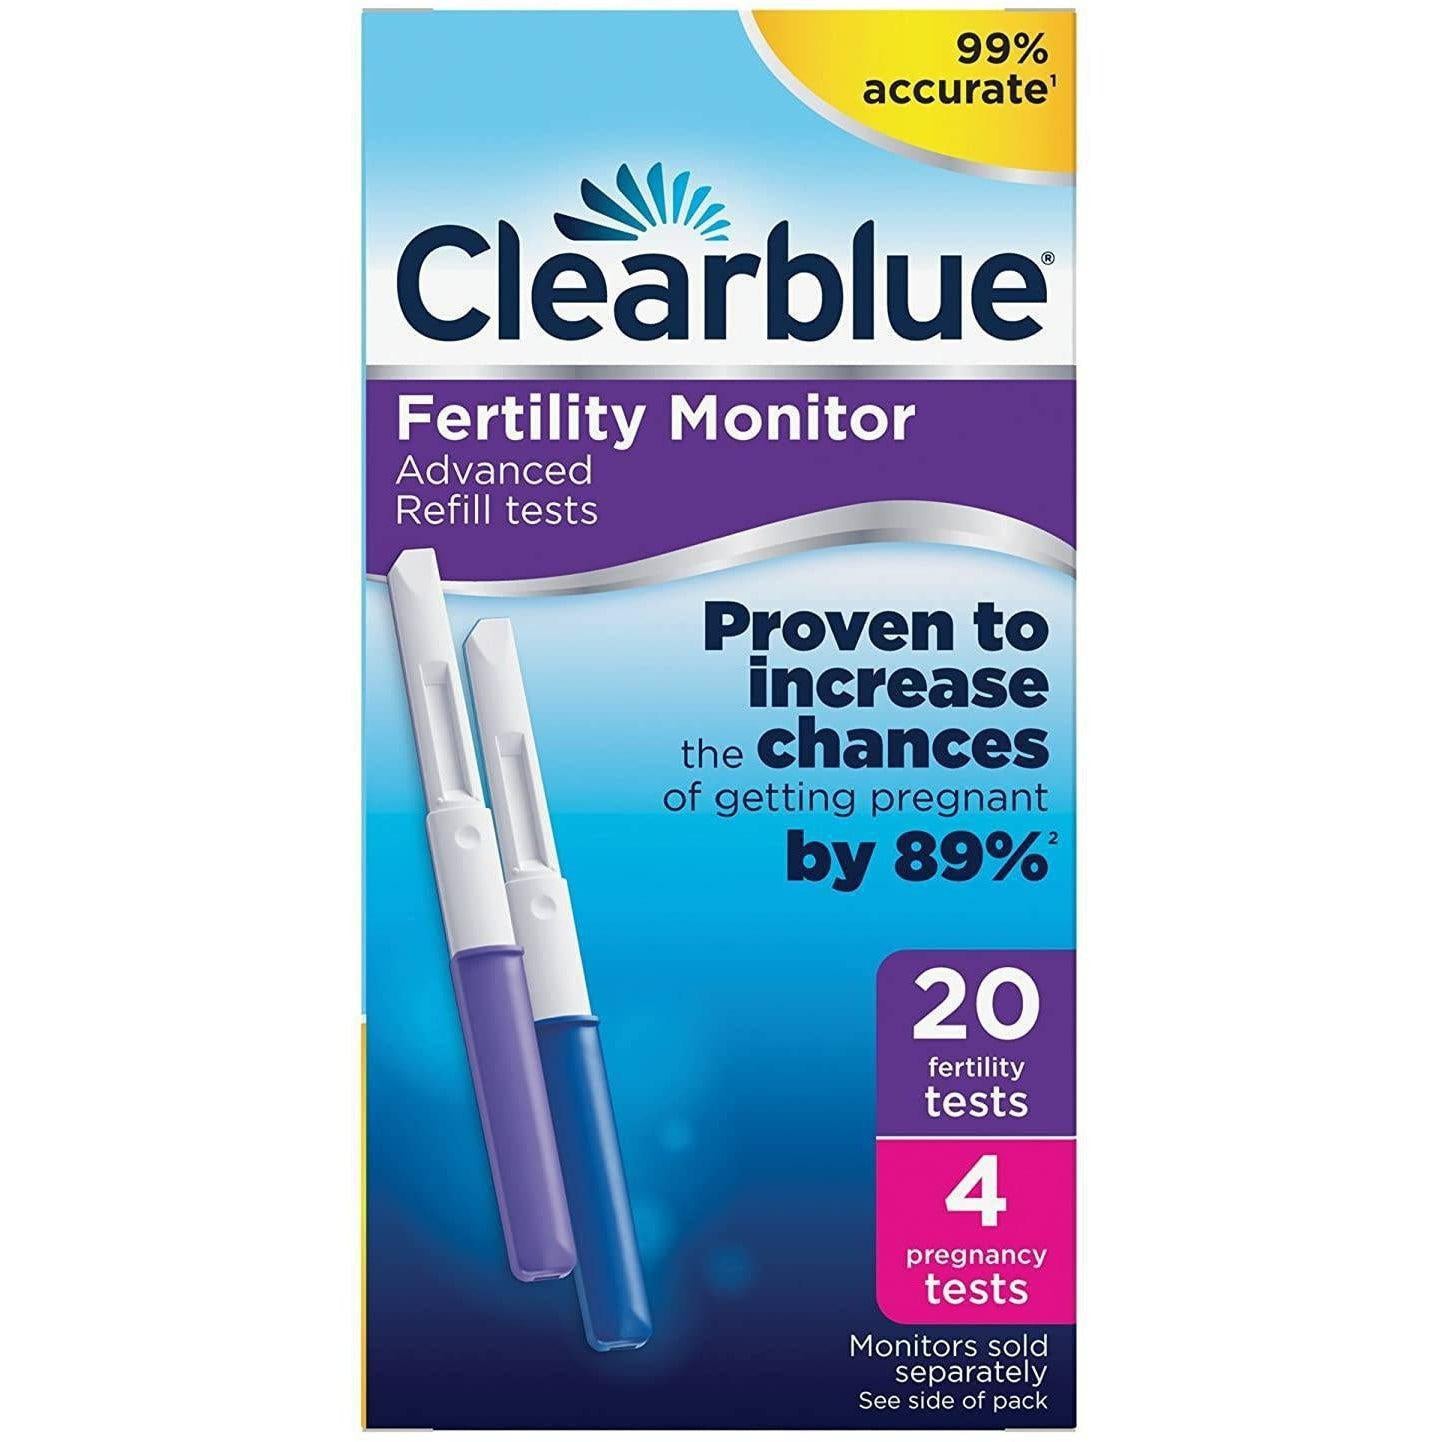 Clearblue Advanced Fertility Monitor Refill Test Sticks with 4 Pregnancy Tests - Pack of 20 +4 - Healthxpress.ie